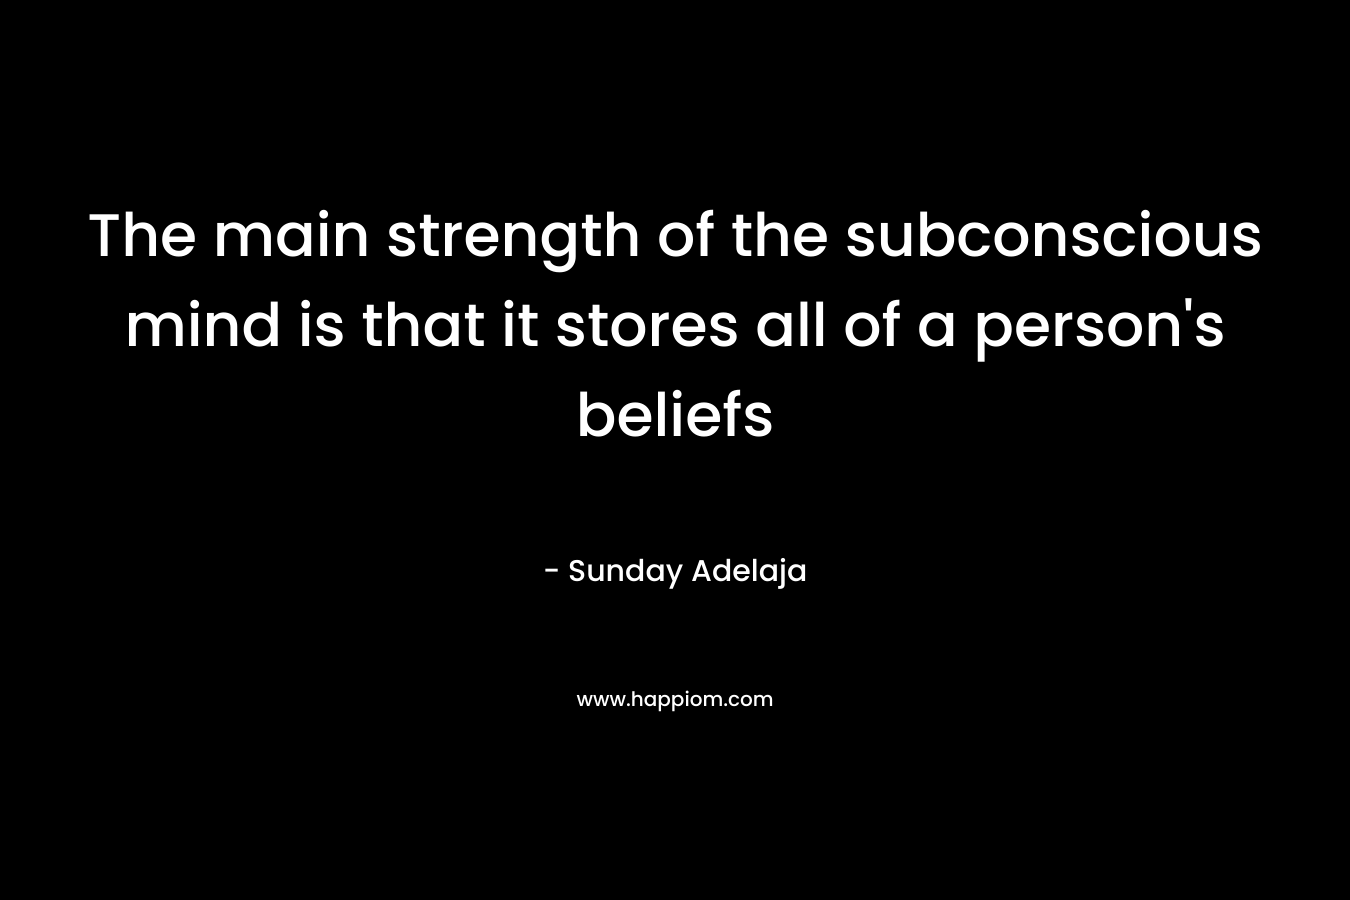 The main strength of the subconscious mind is that it stores all of a person's beliefs